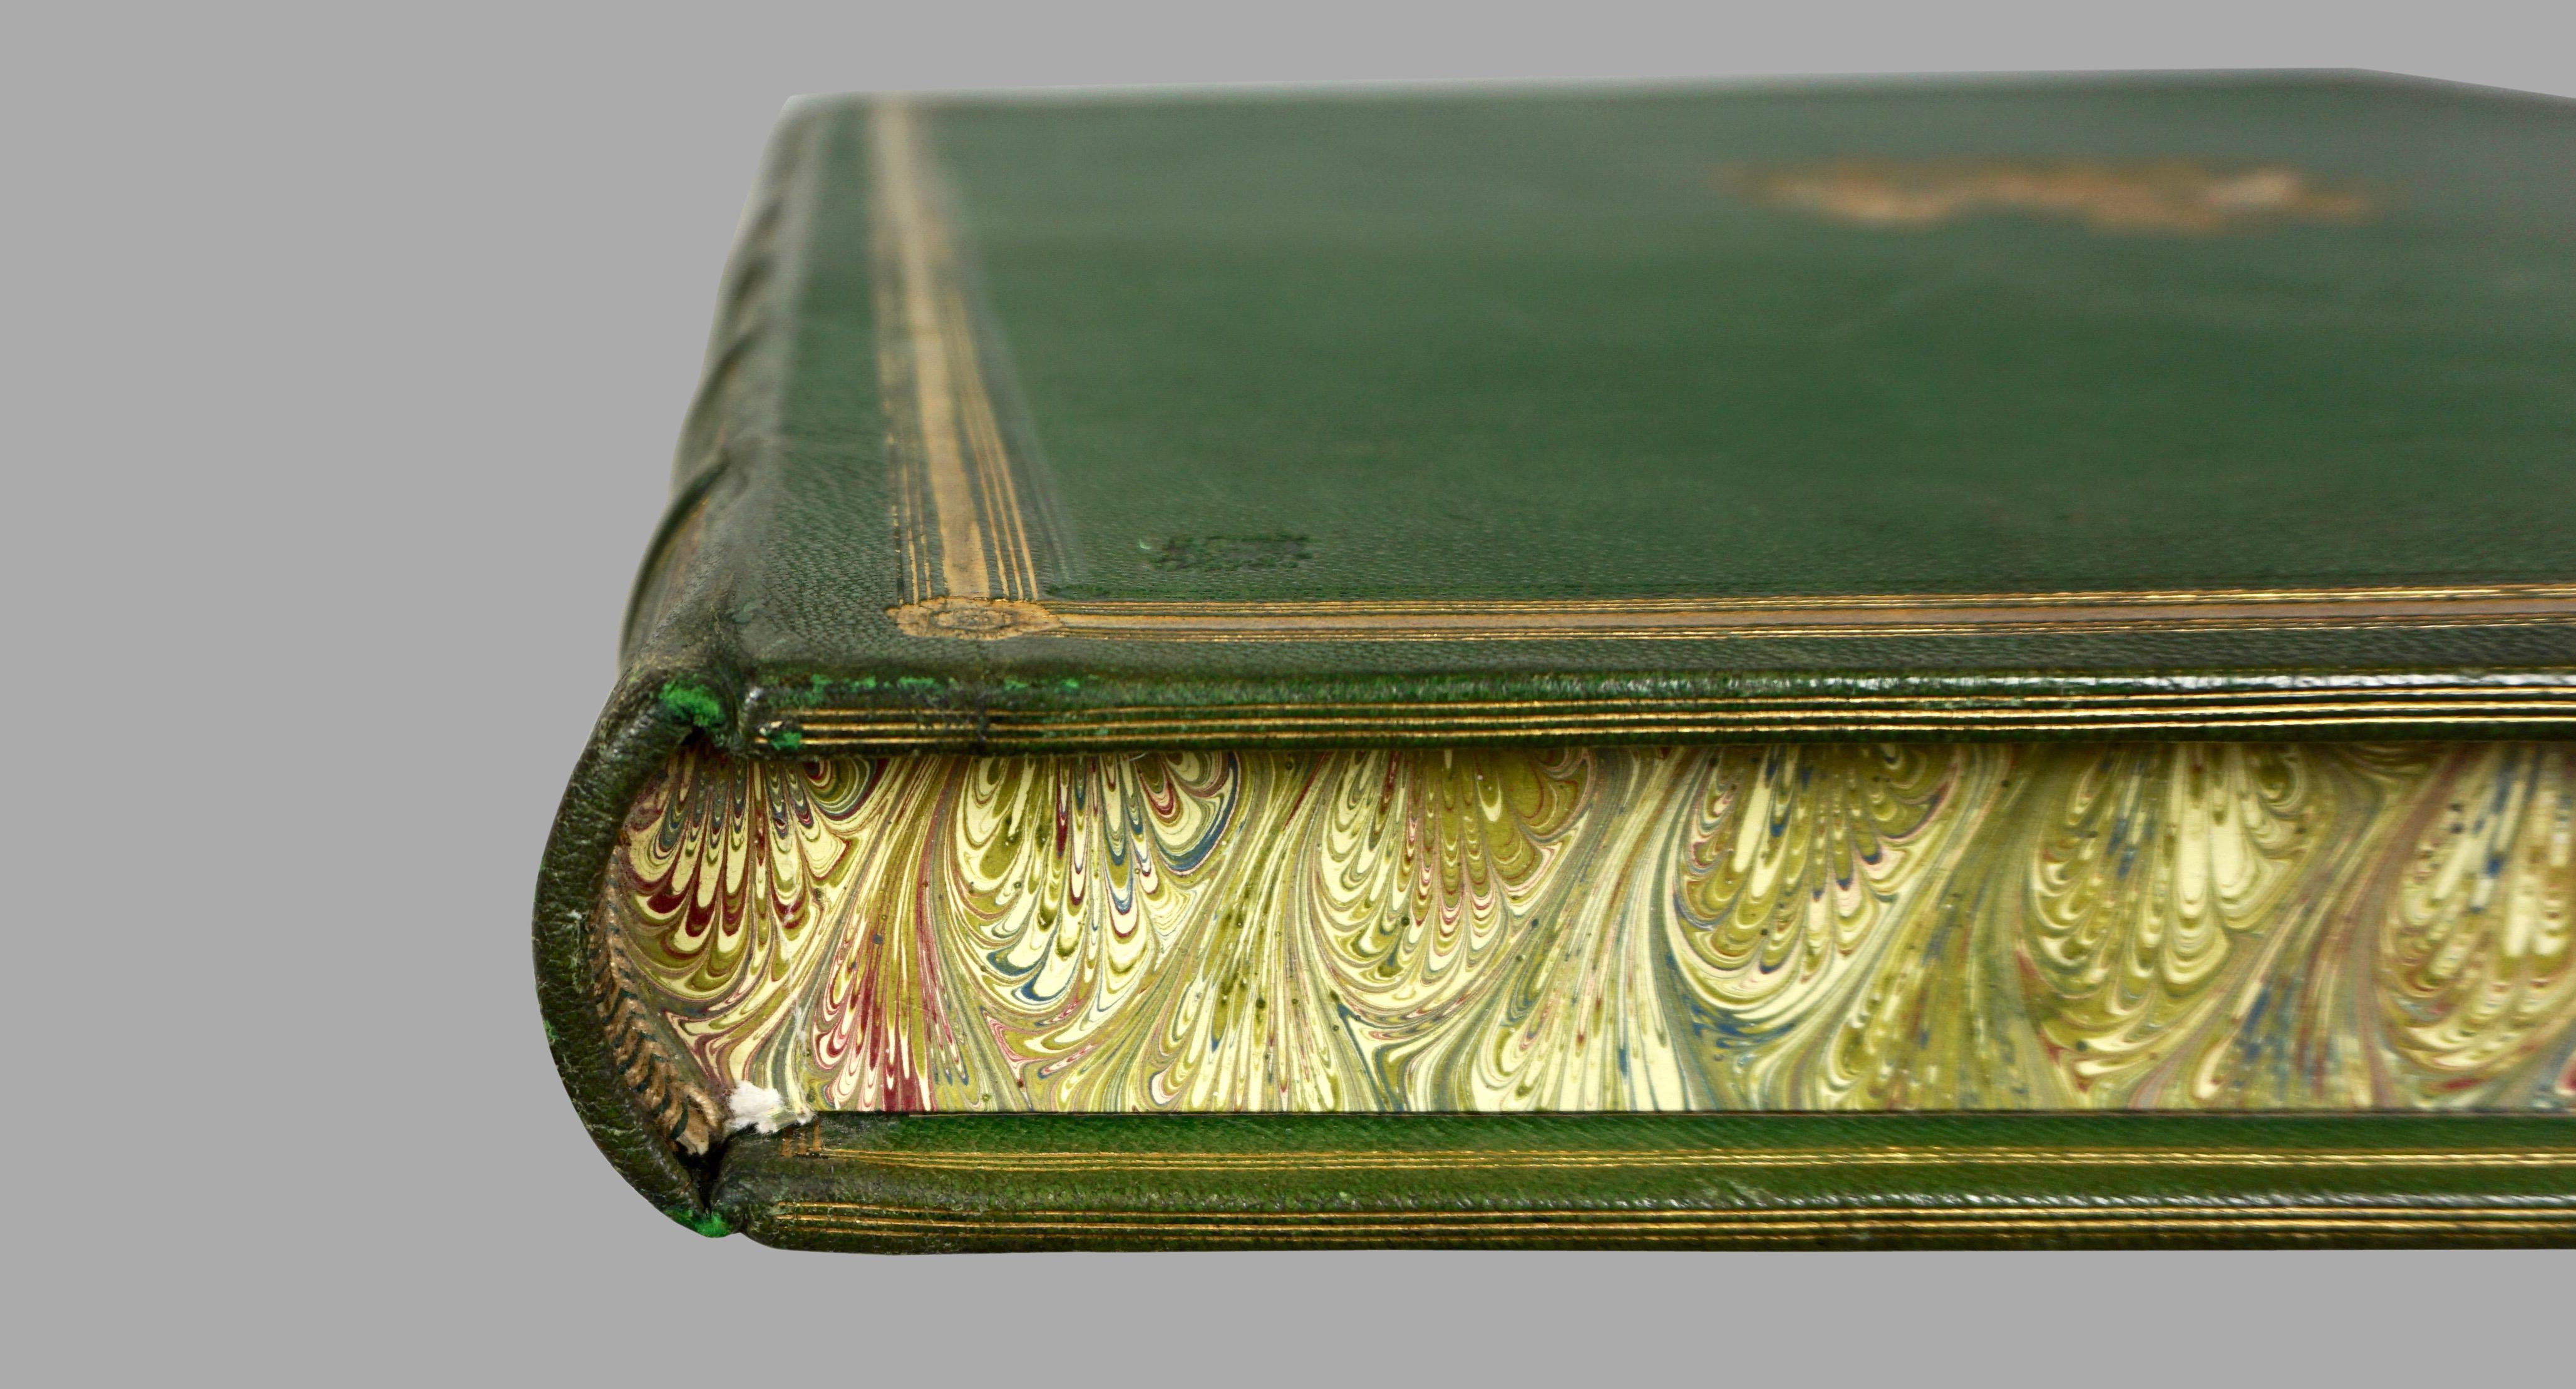 Green Morocco Leather Elephant Folio Book Cover Now A Marbleized Paper Lined Box 4